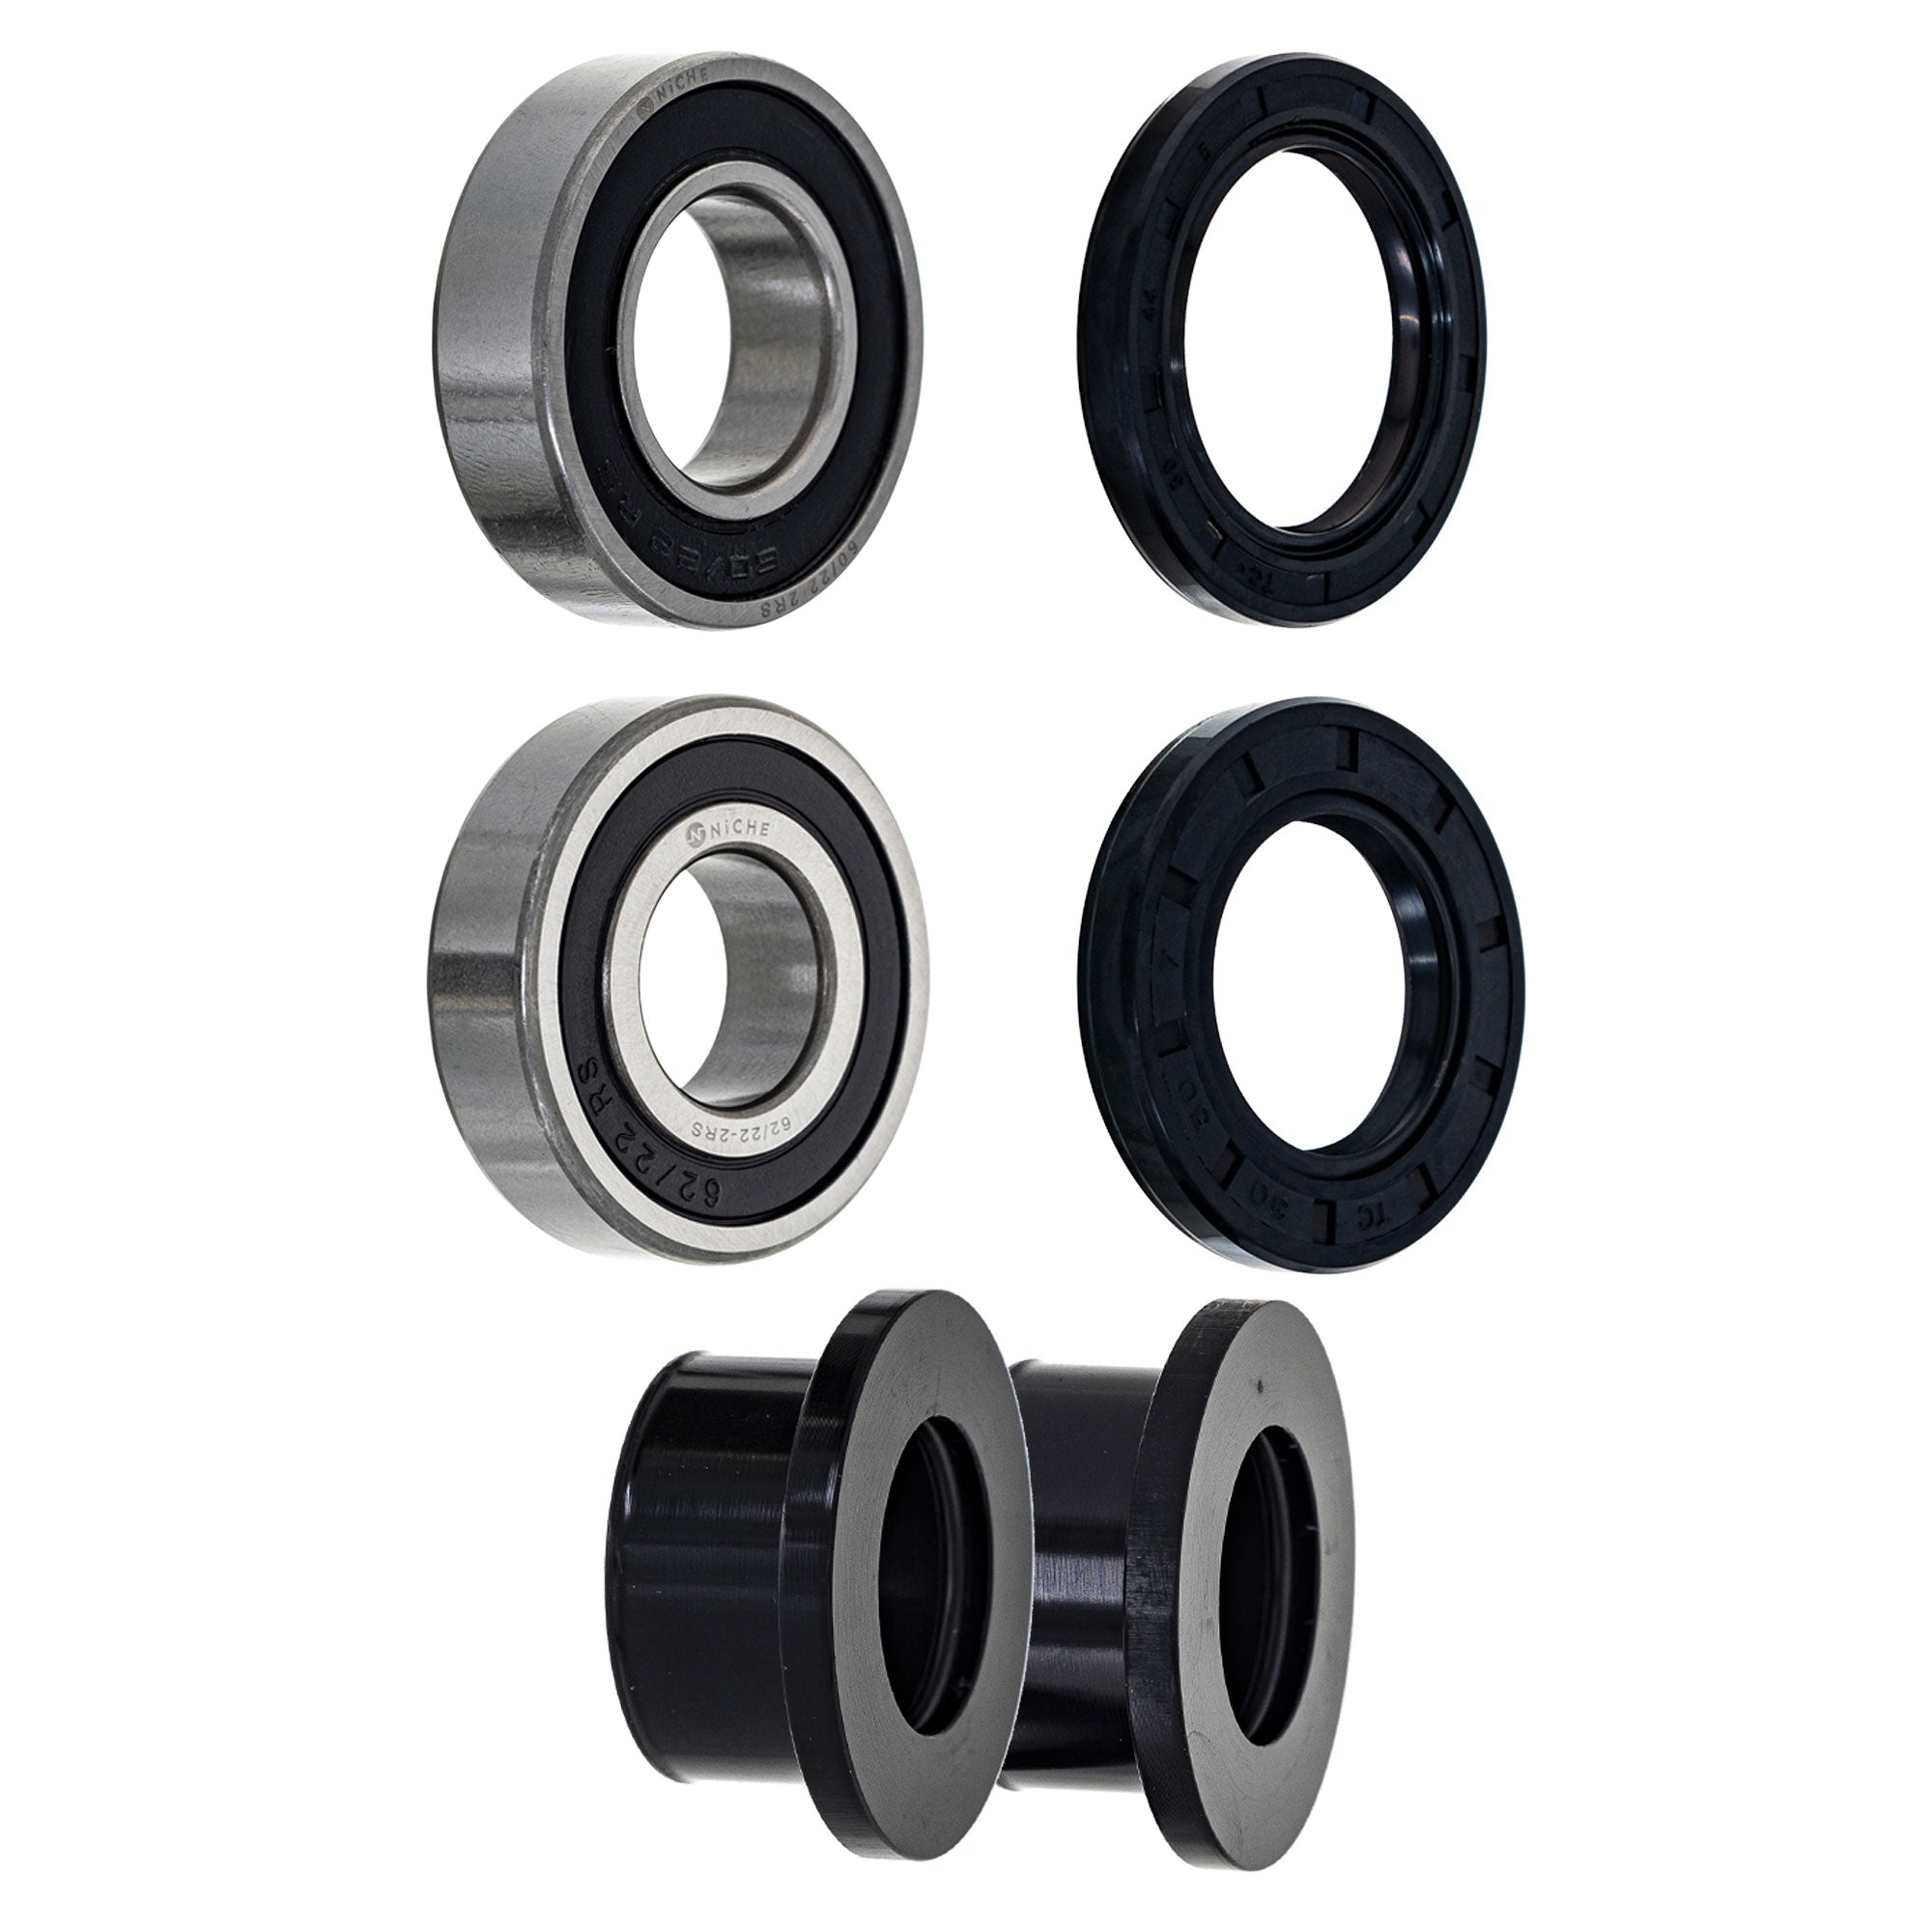 Wheel Bearing Spacer Seal Kit for zOTHER YZ450FX YZ450F YZ250X YZ250FX NICHE MK1009214